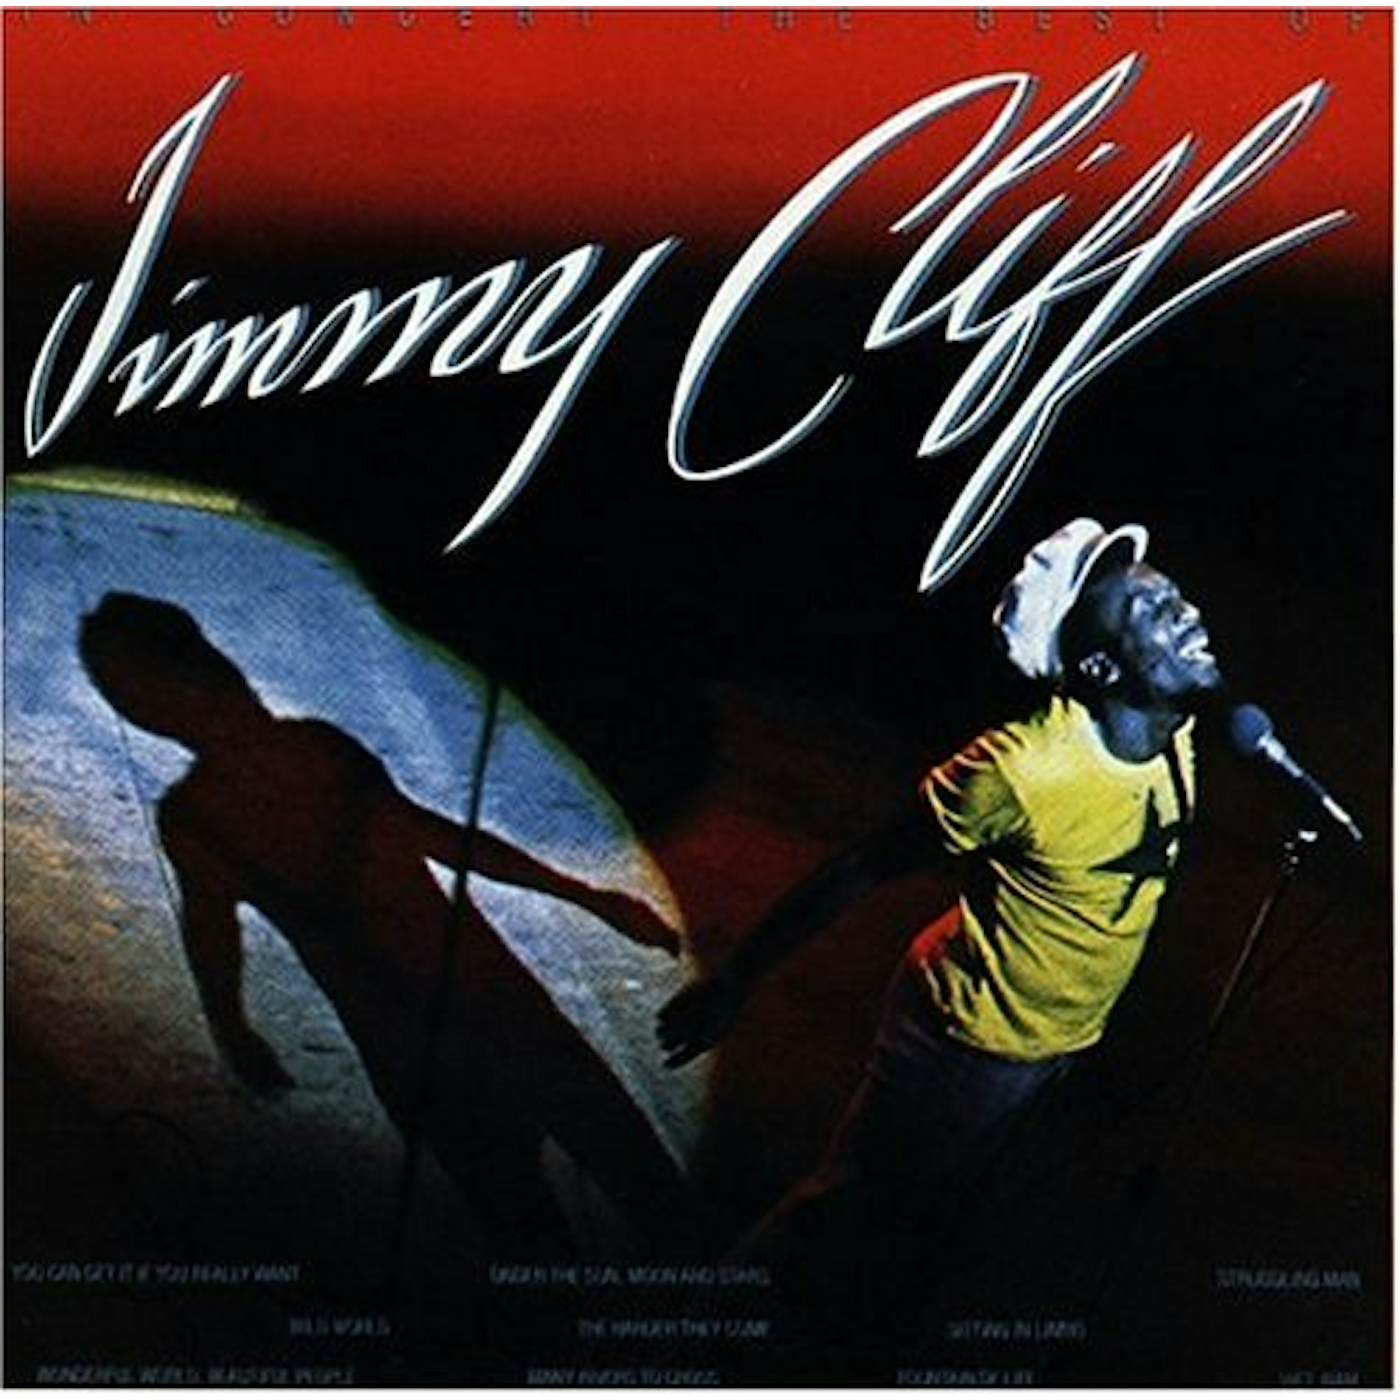 Jimmy Cliff IN CONCERT: BEST OF CD